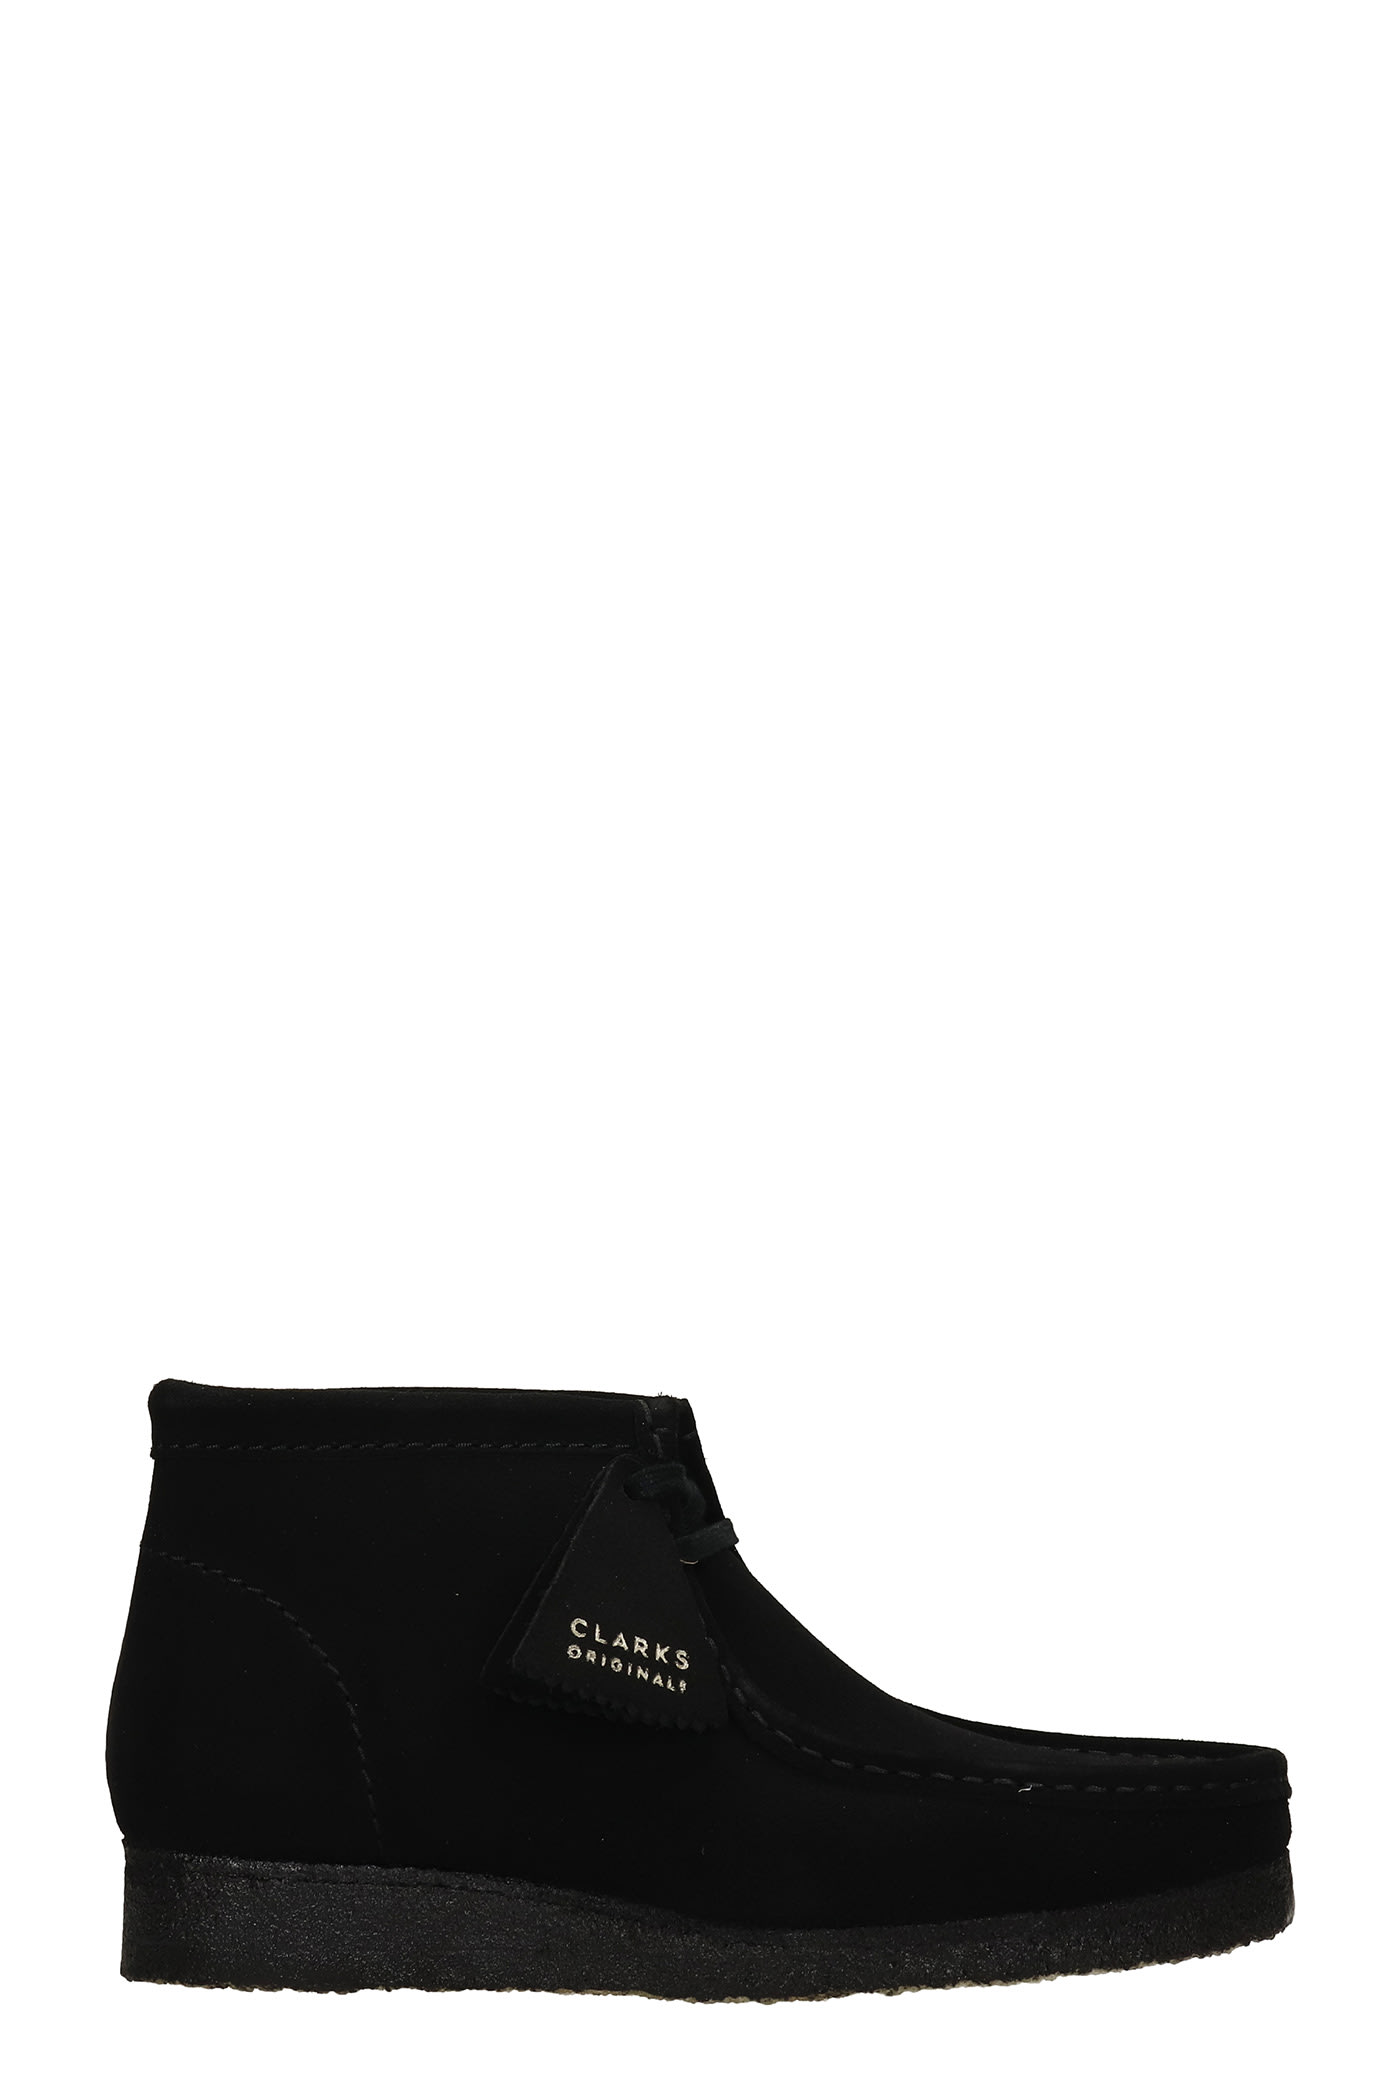 Clarks Wallabee Boot Ankle Boots In Black Suede